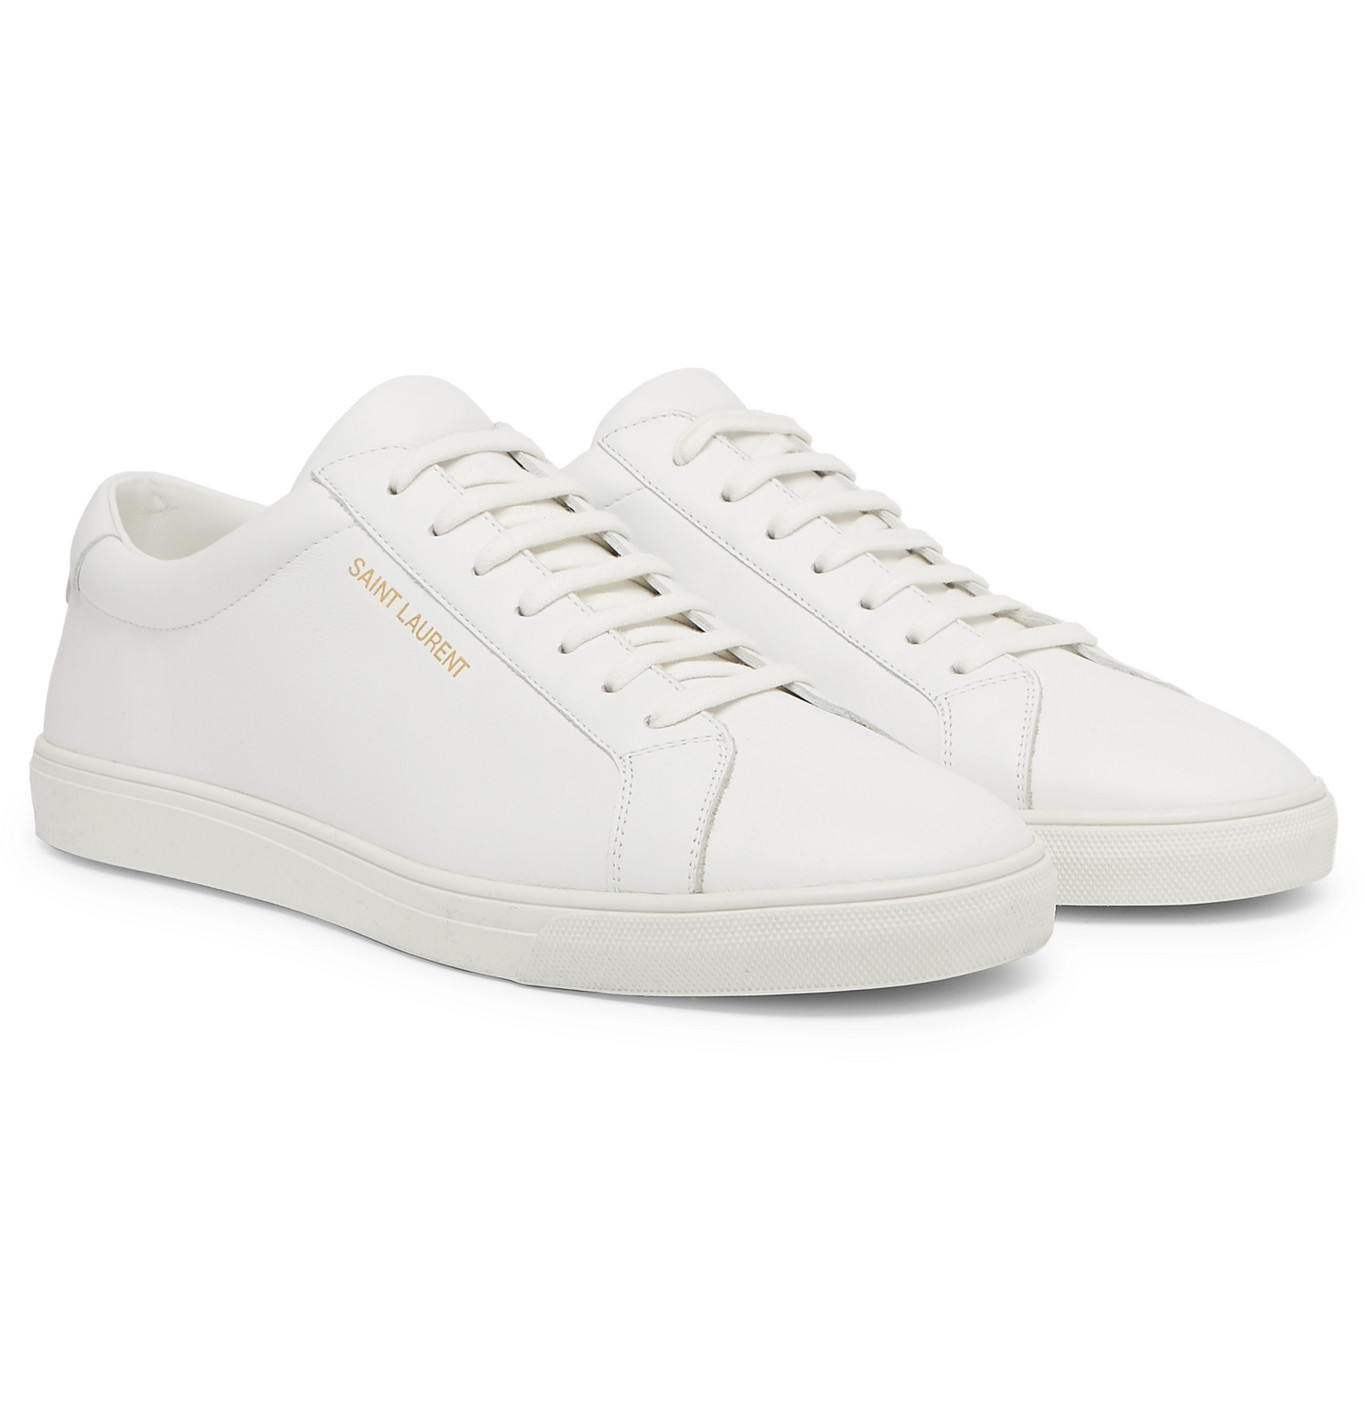 white leather sneakers men